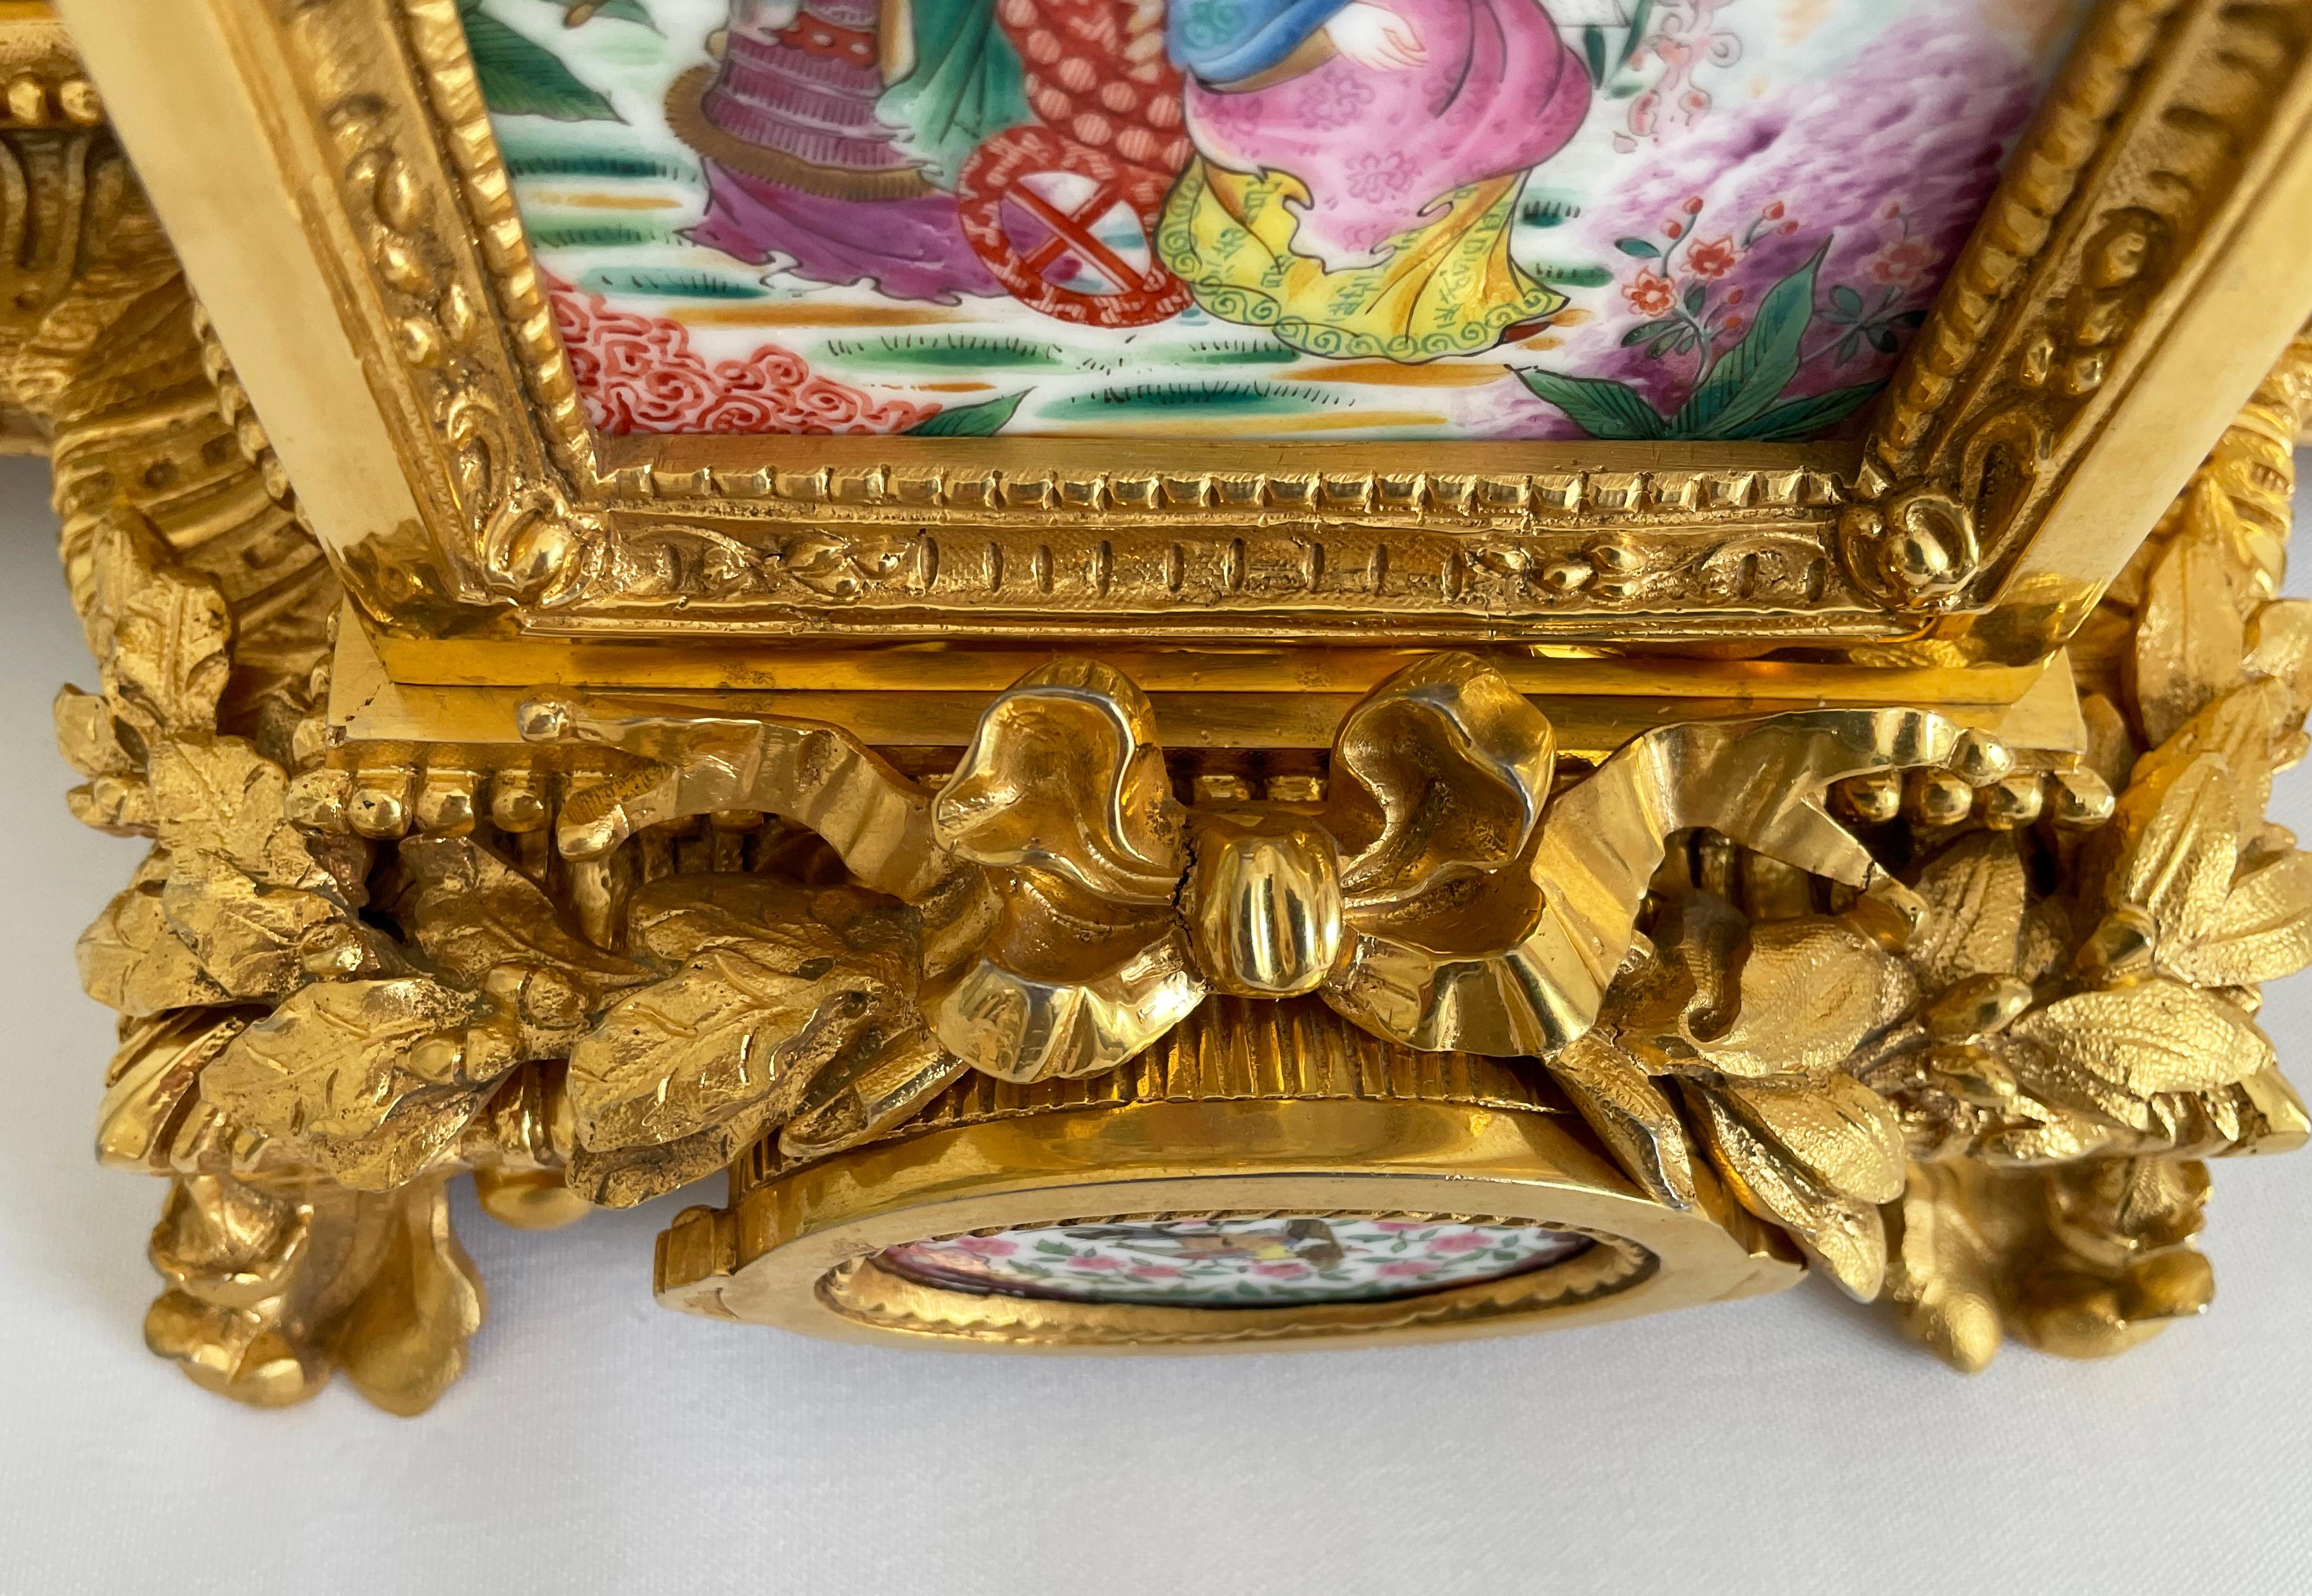 French Gilt Bronze And Porcelain Chinoiserie Themed Mantel Clock, 19th Century For Sale 6